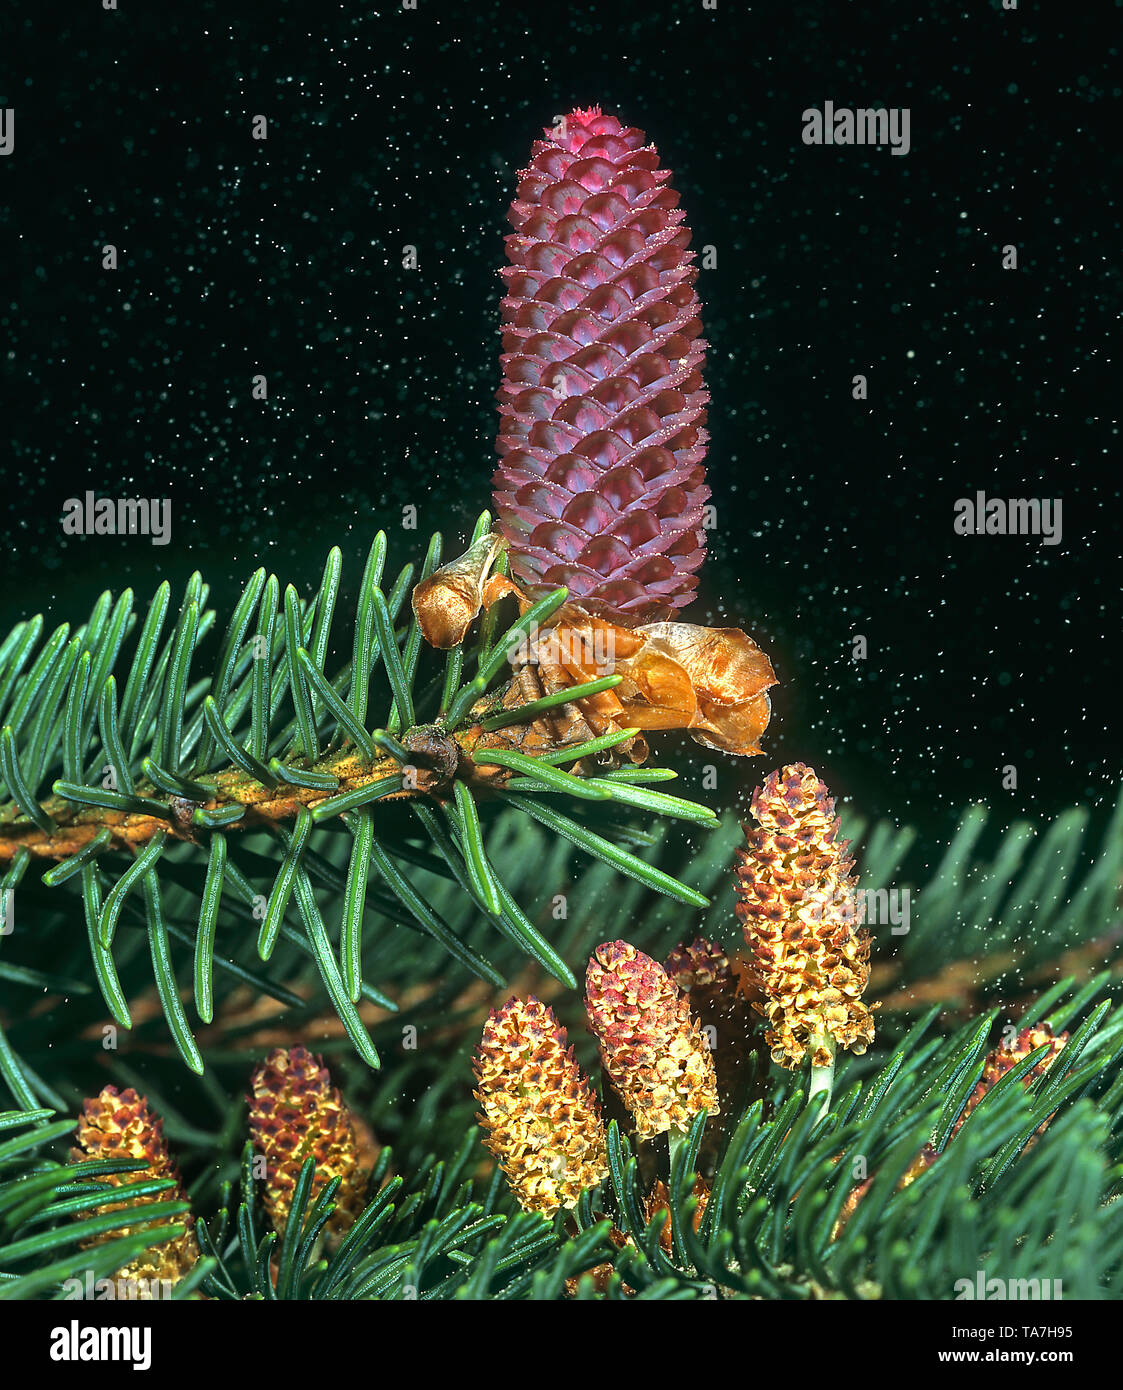 Common Spruce, Norway Spruce (Picea abies). Twig with female flower (above) and several male flowers (below) with pollen in the air (anemophily). Germany Stock Photo